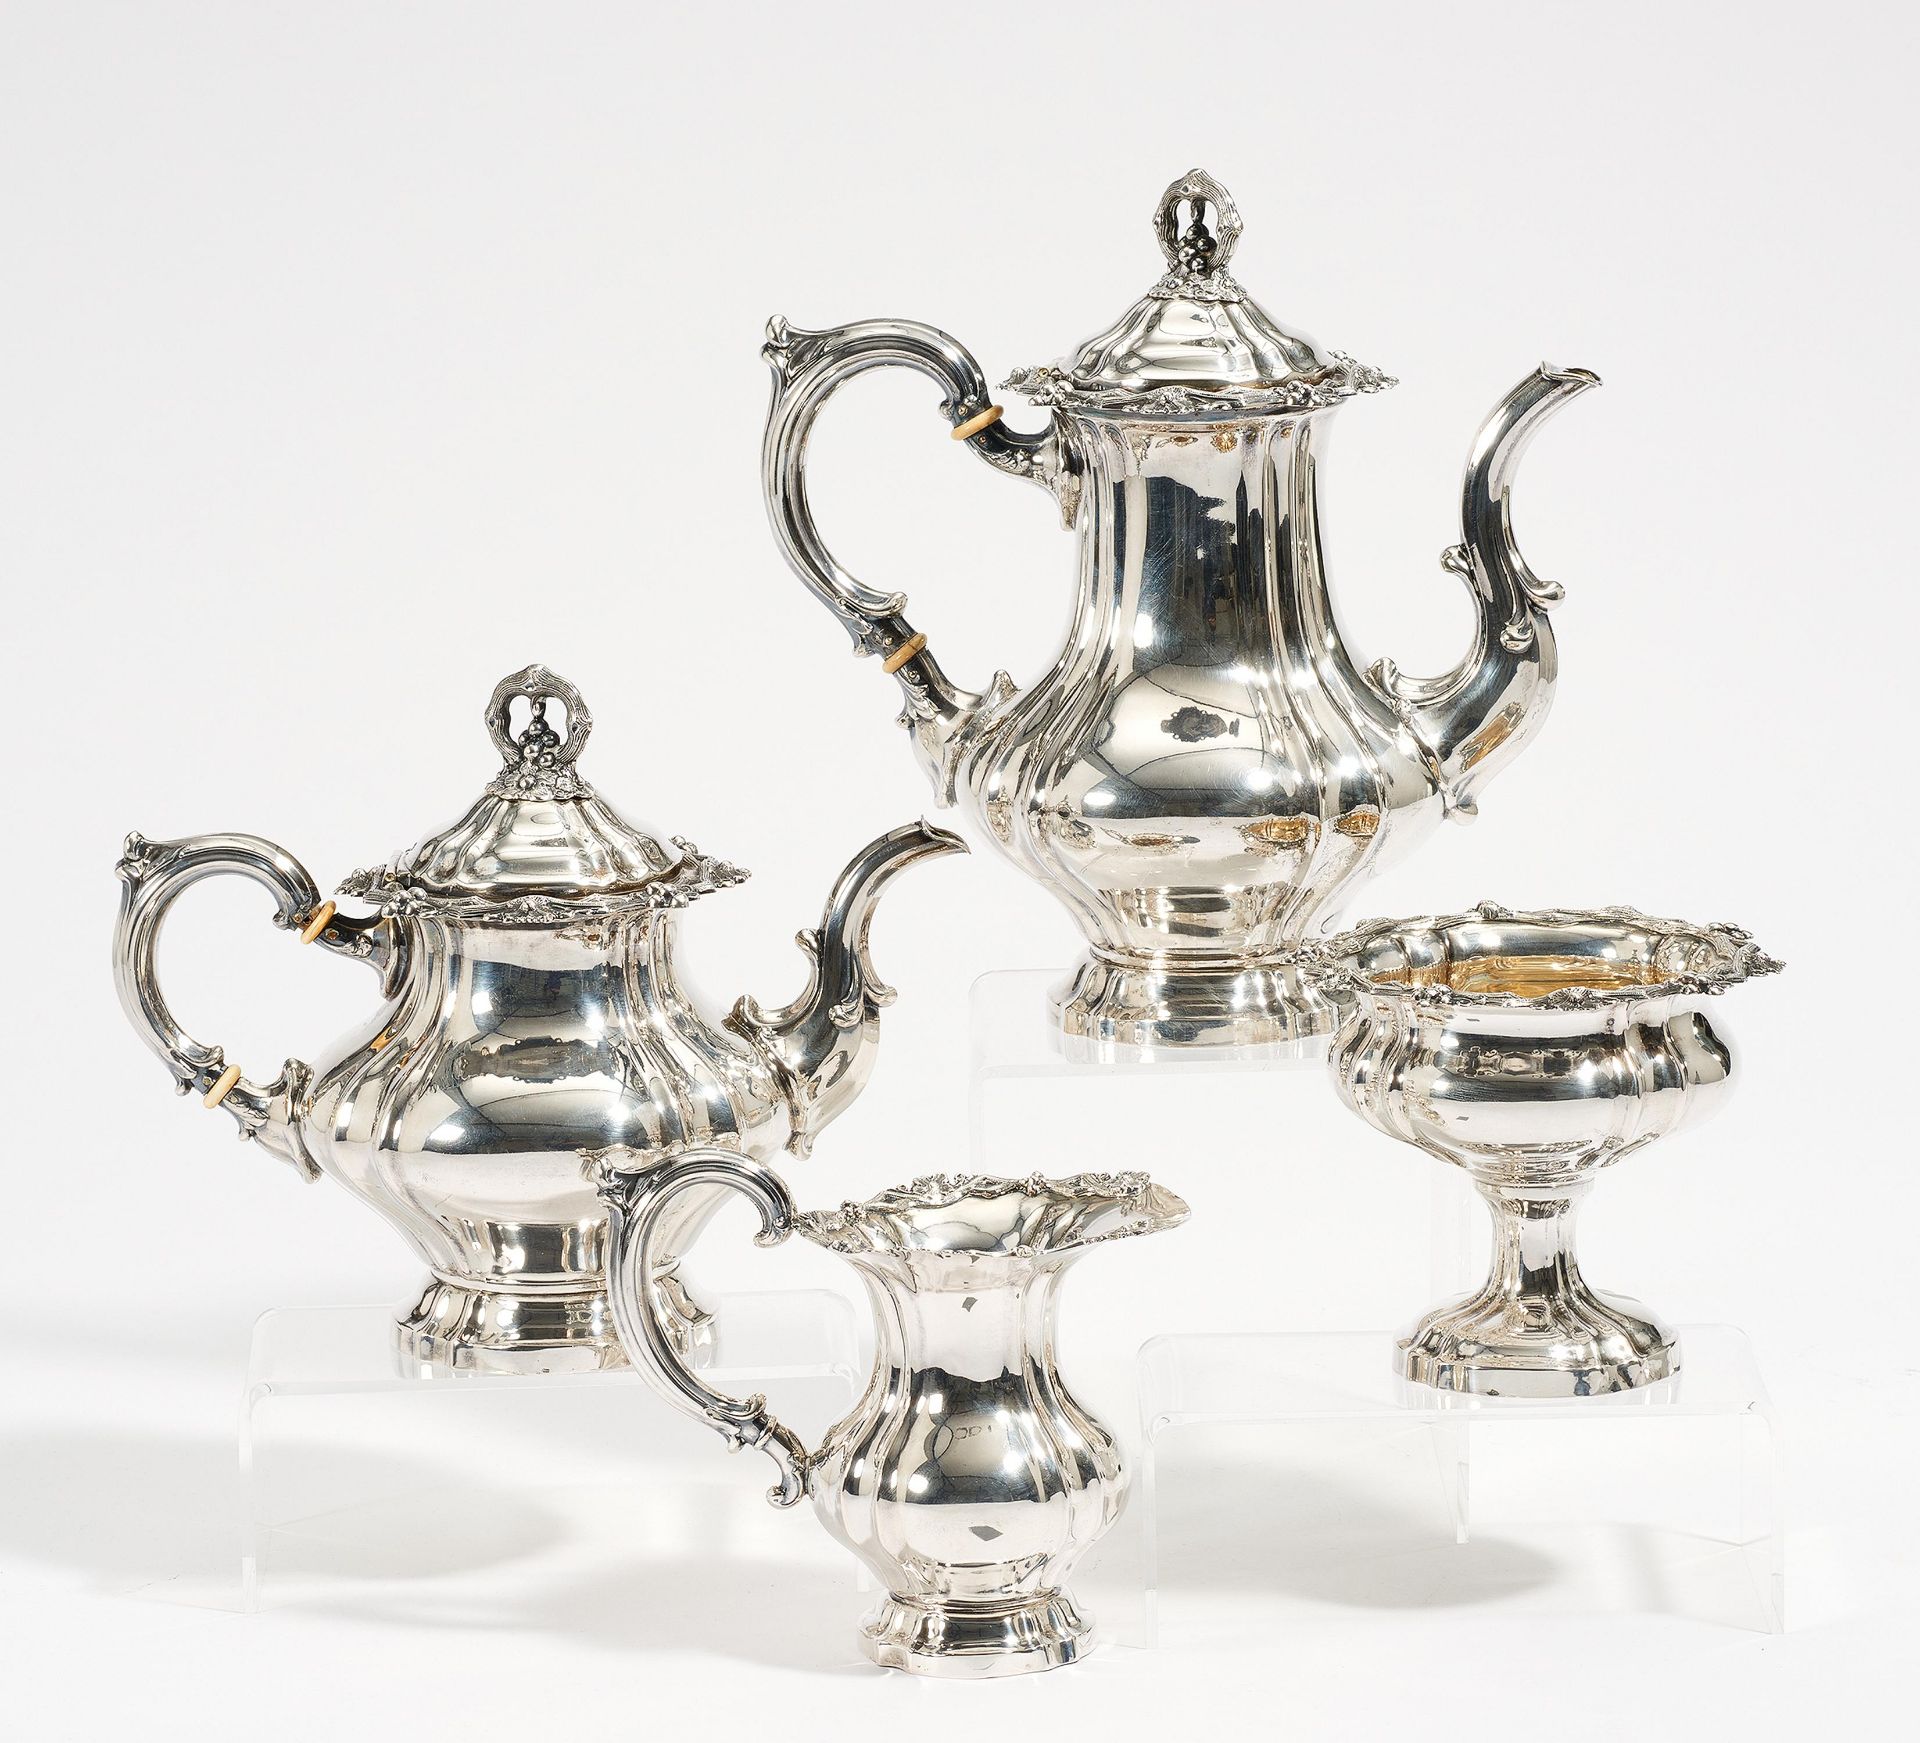 FOUR-PIECE SILVER COFFEE AND TEA SERVICE WITH VINE DECOR. Presumably Germany. Ca. 1900. Silver,